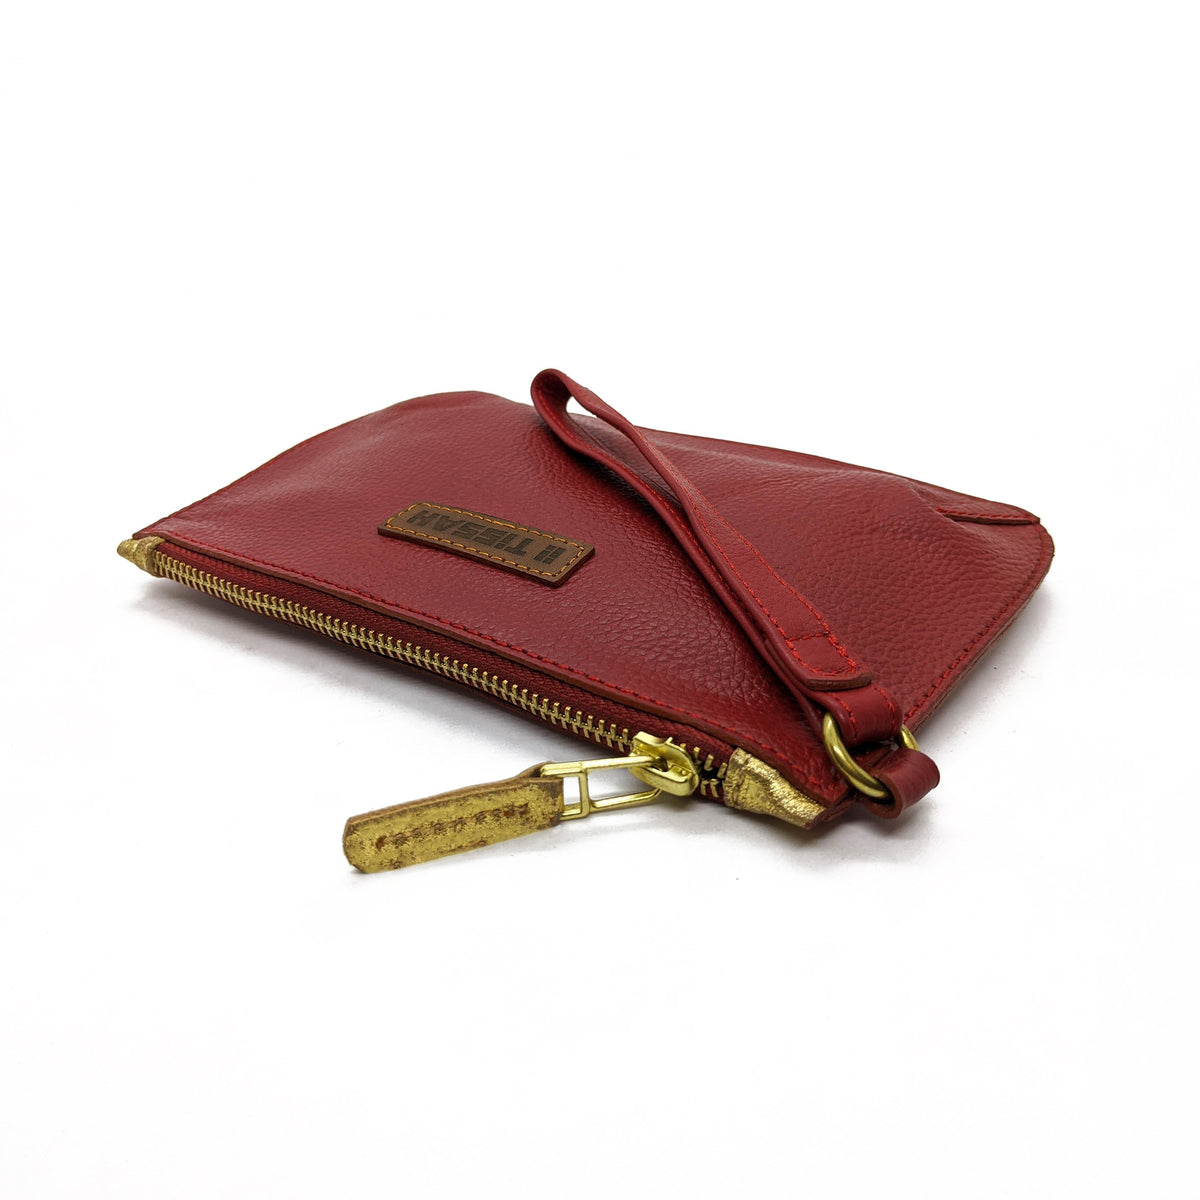 Wristlet - Red with Gold trimmings